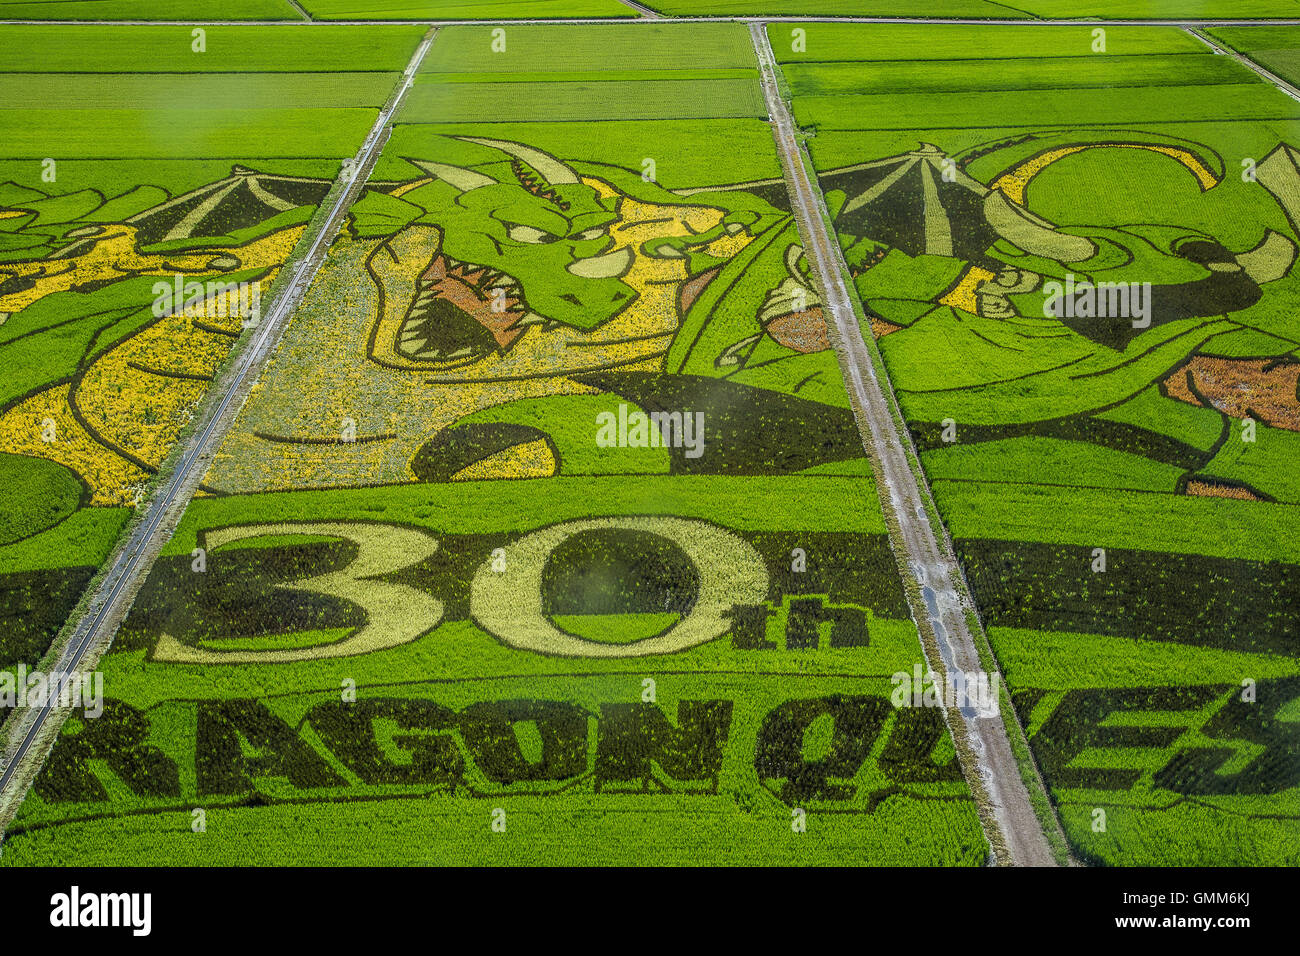 Gyoda is a mostly flat city full of rice paddies. One of these paddies has been turned into a giant artistic canvas. Stock Photo